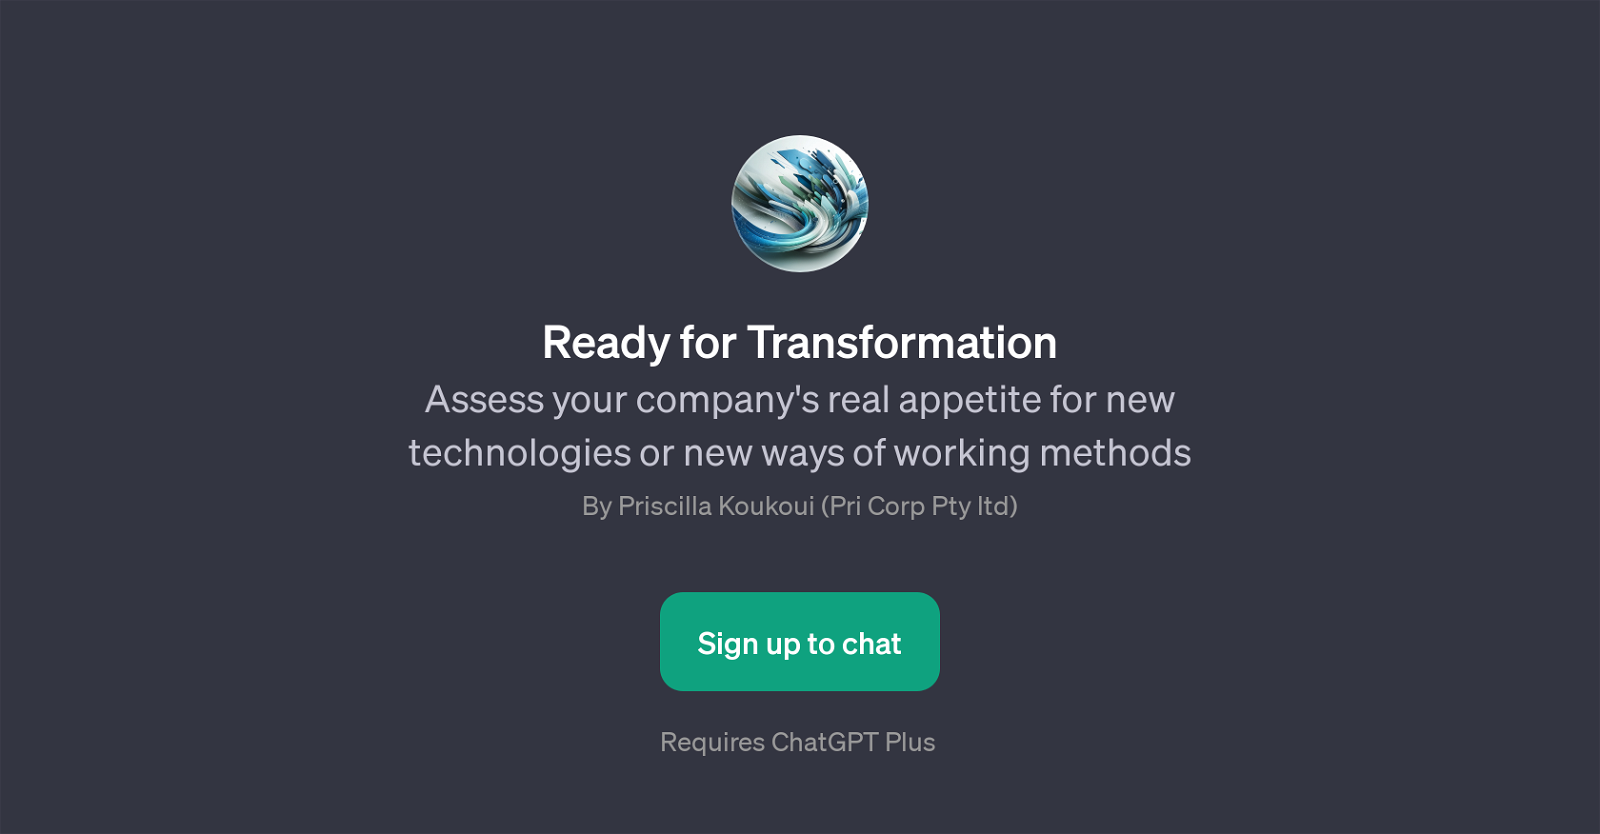 Ready for Transformation website